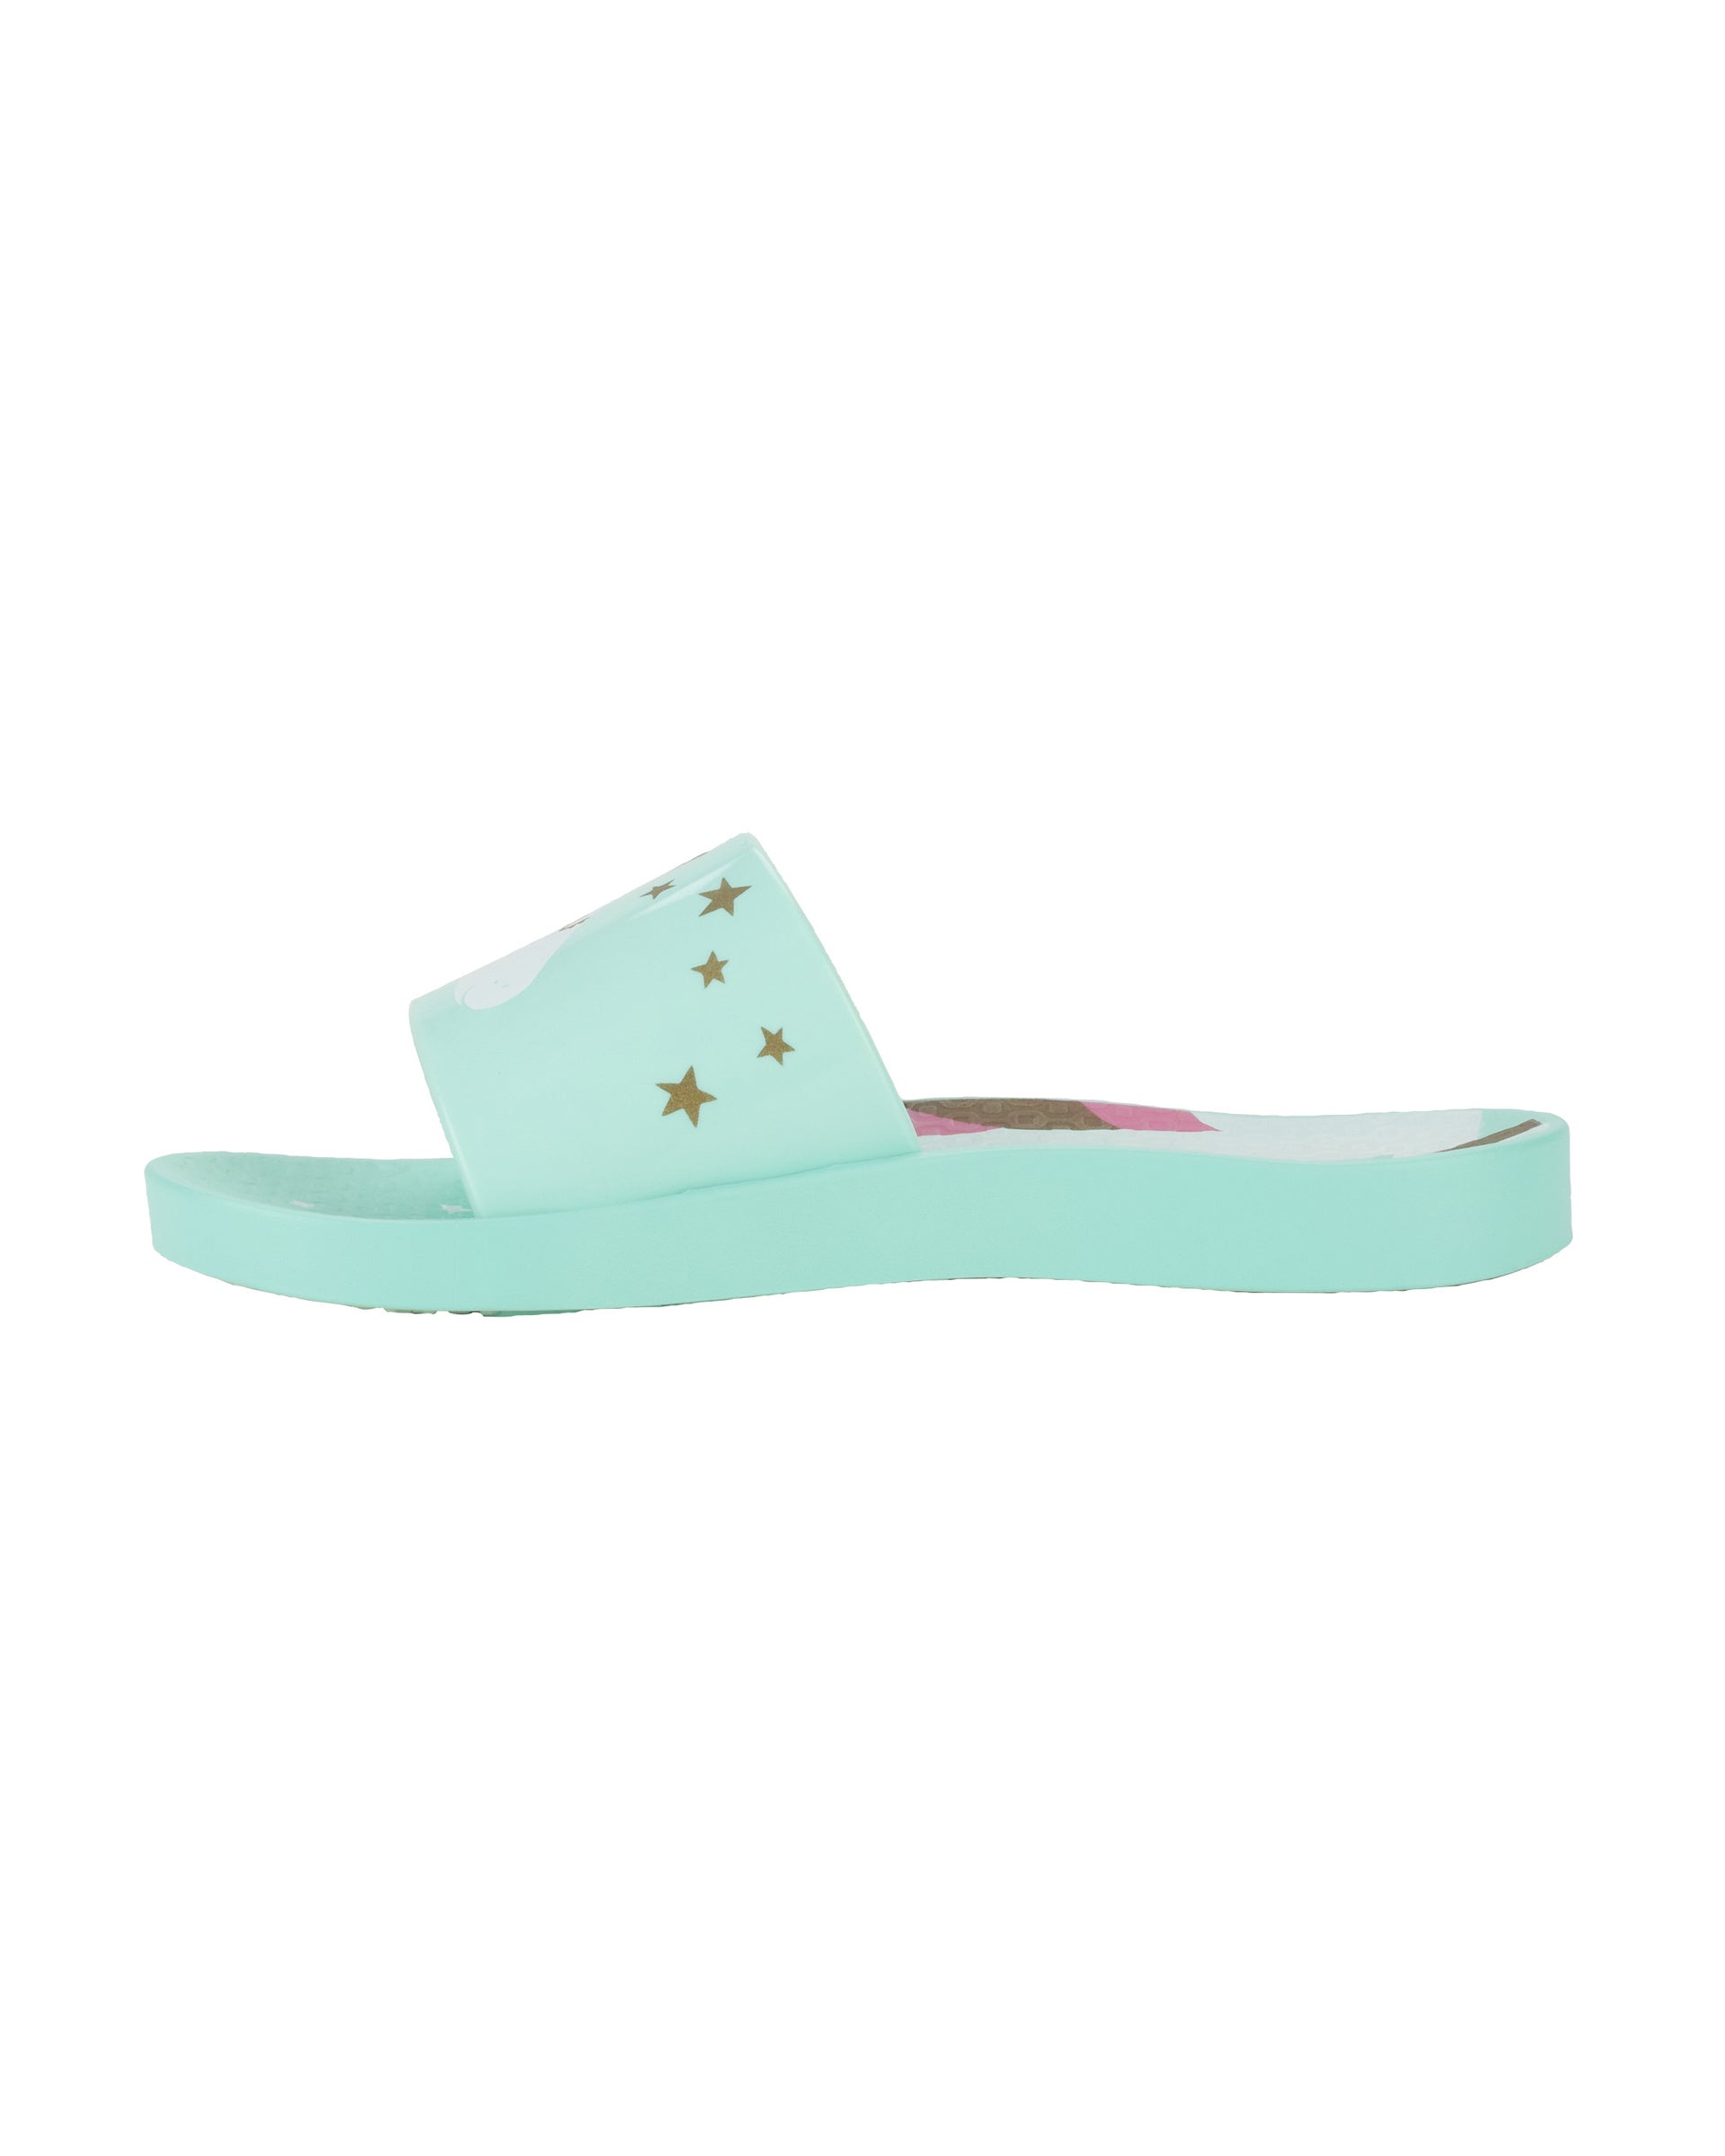 Inner side view of a green Ipanema Urban kids slide with a unicorn on the upper.